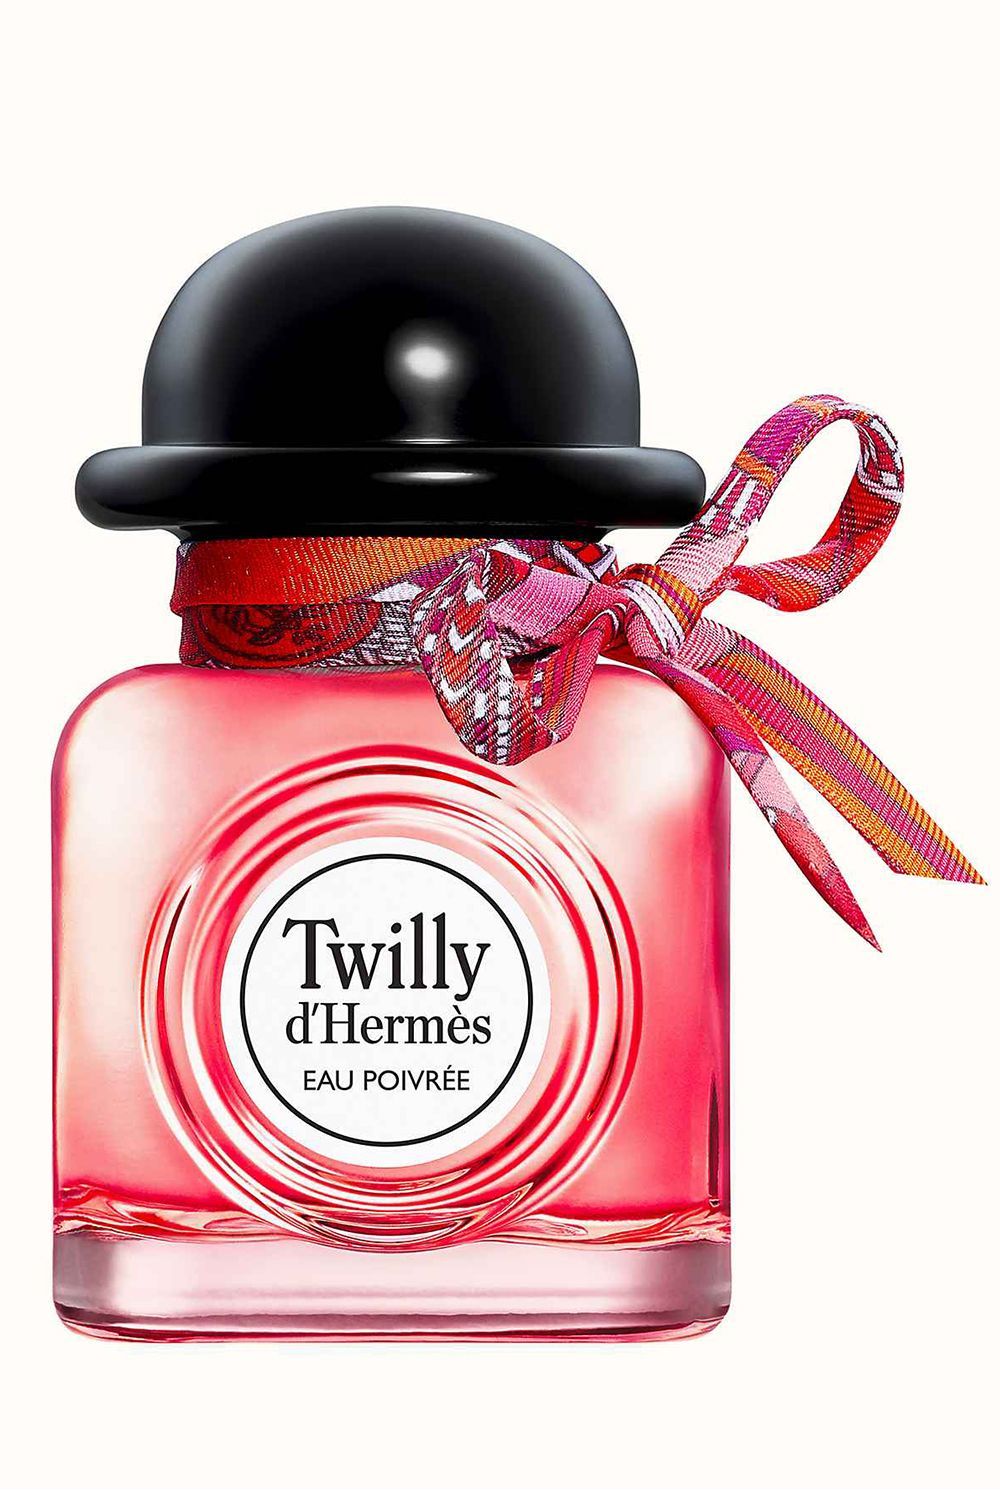 22 Best Winter and Fragrances of 2021